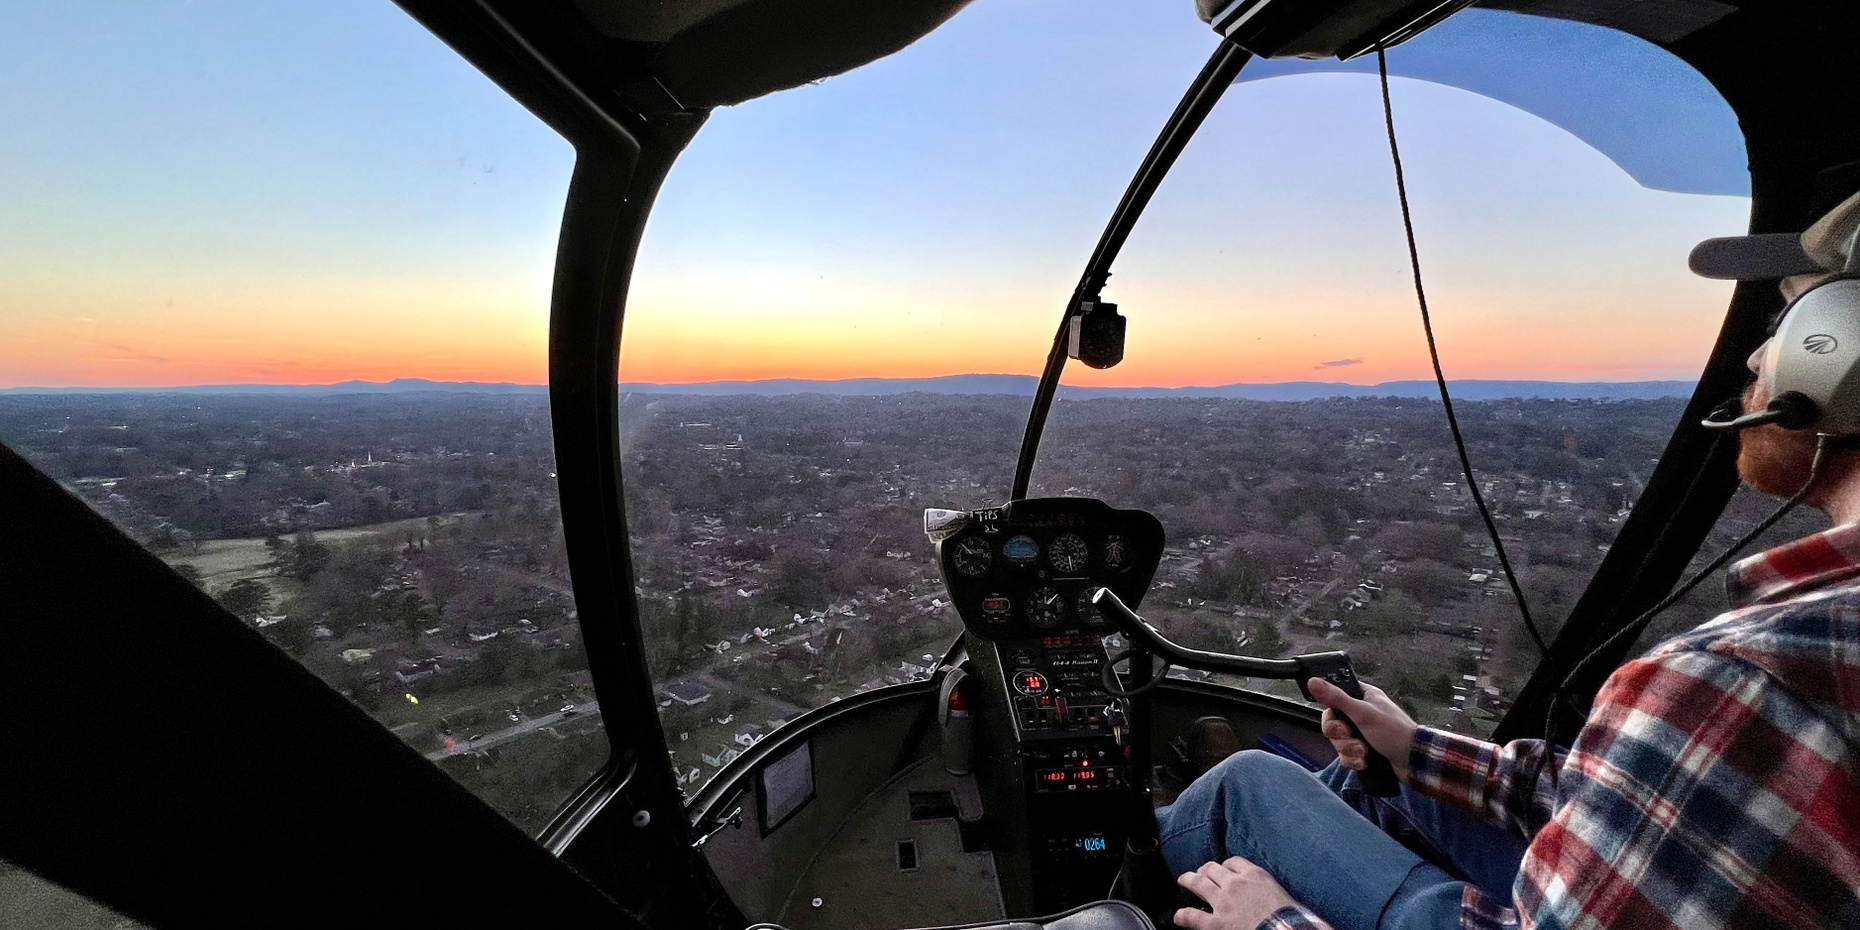 The Downtown Helicopter Tour in Chattanooga